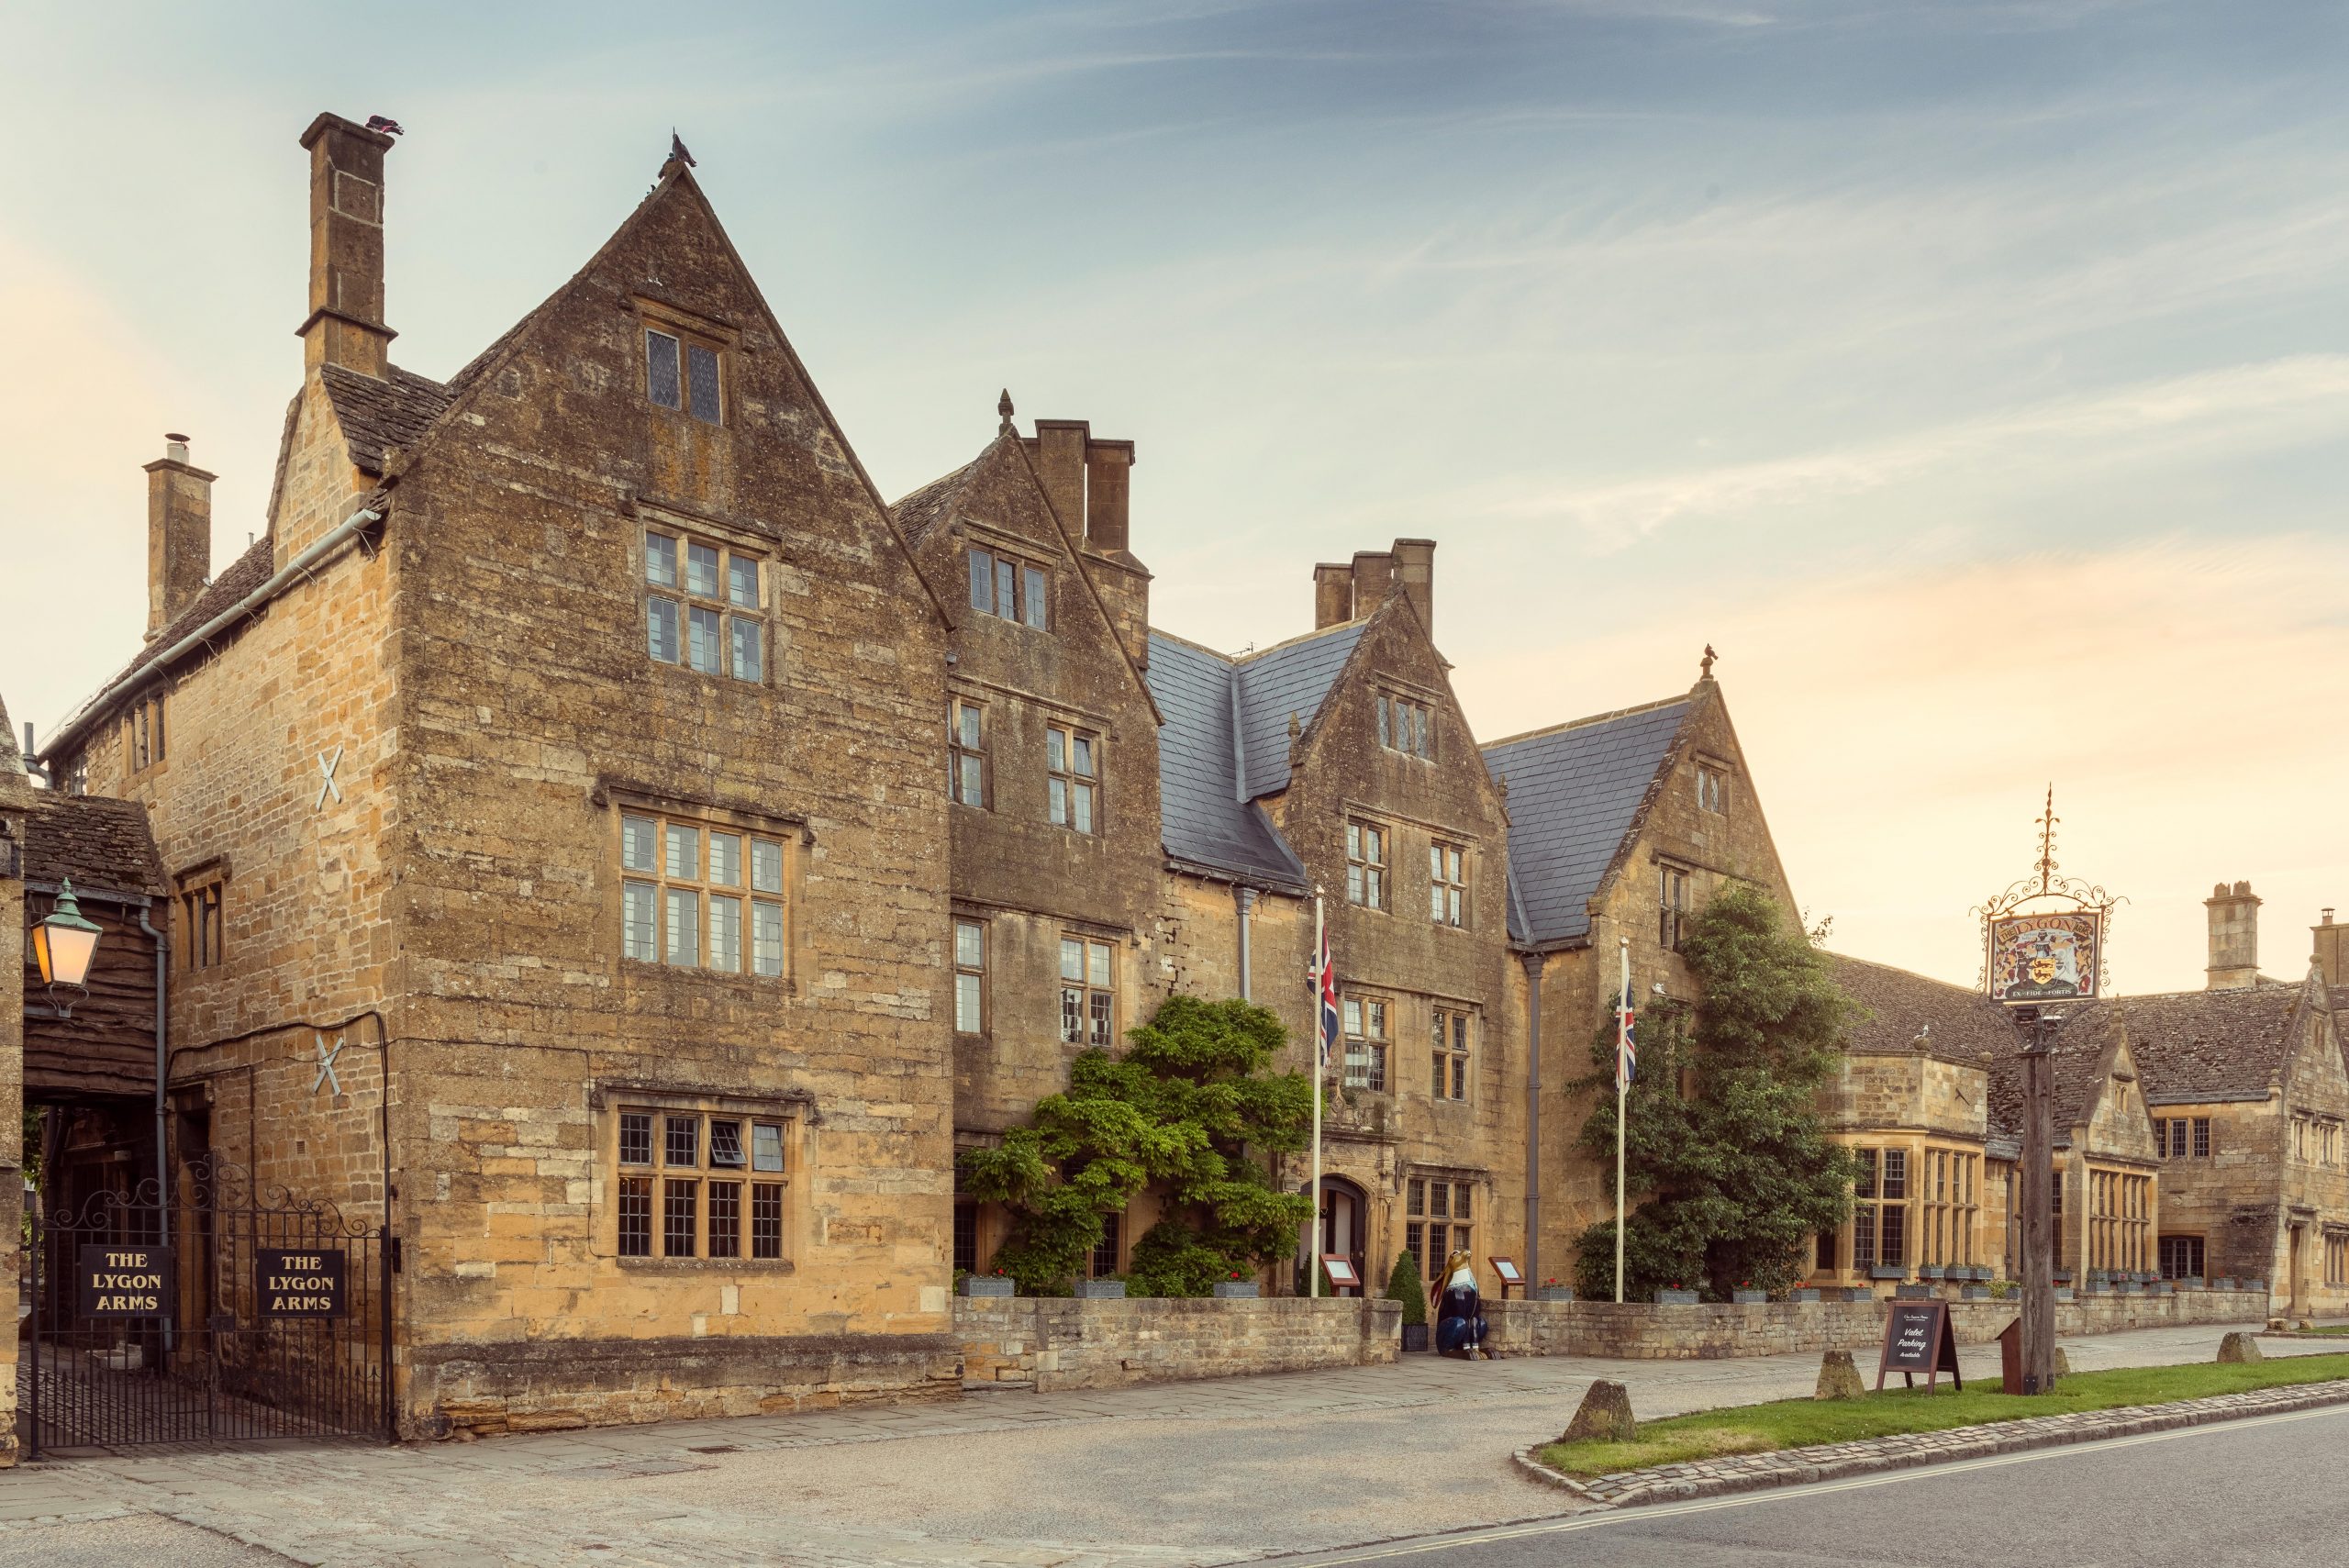 Escape To The Country At The Lygon Arms Hotel, Cotswolds